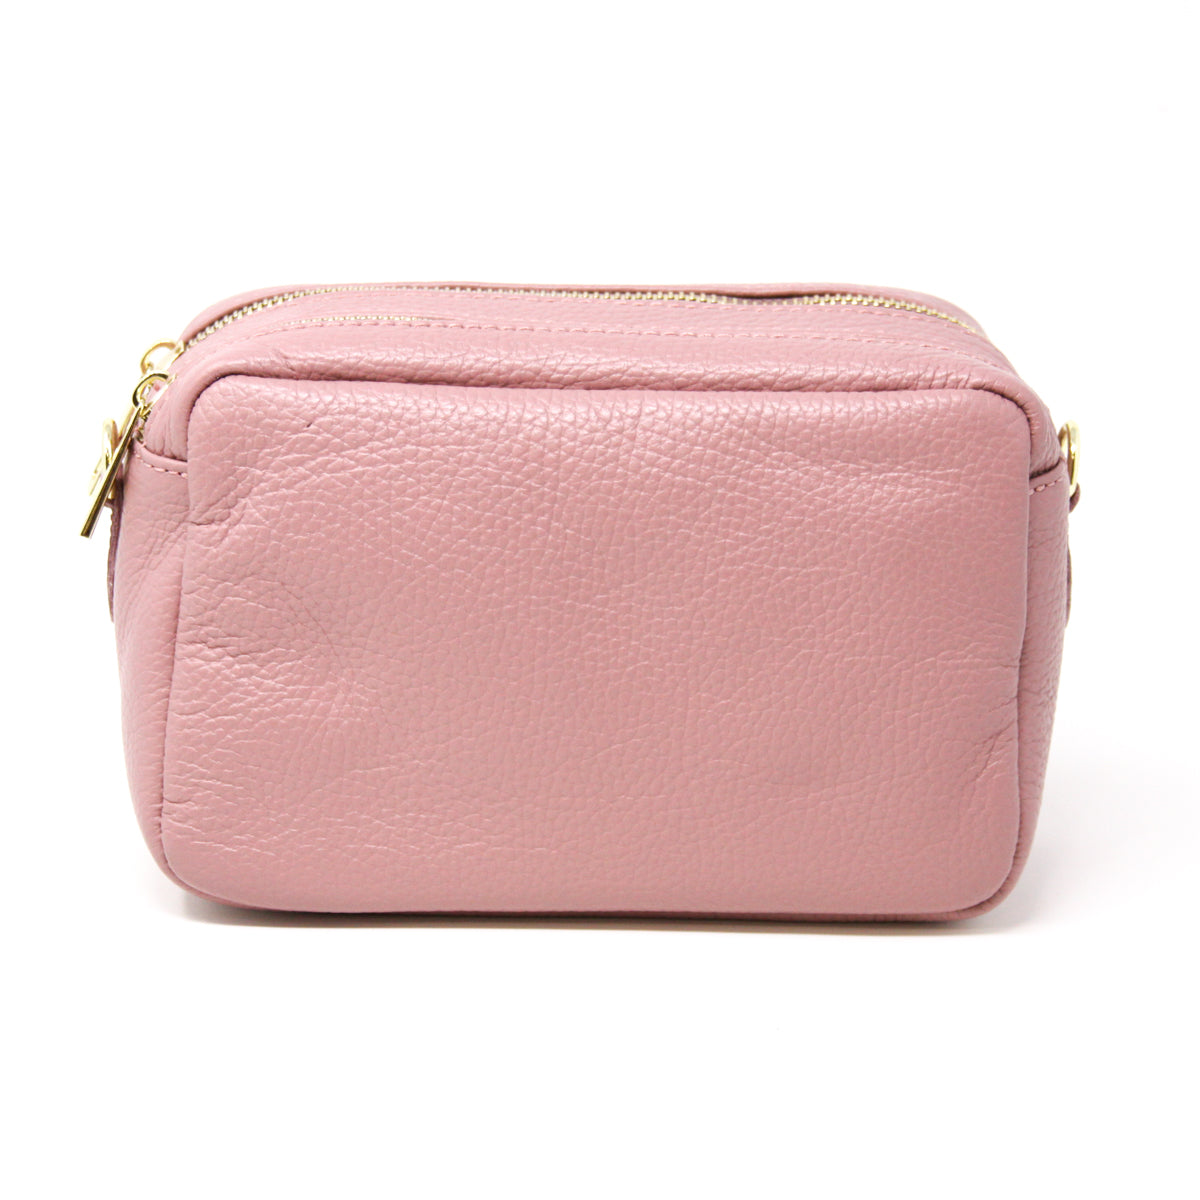 Leather Camera Bag in Pink